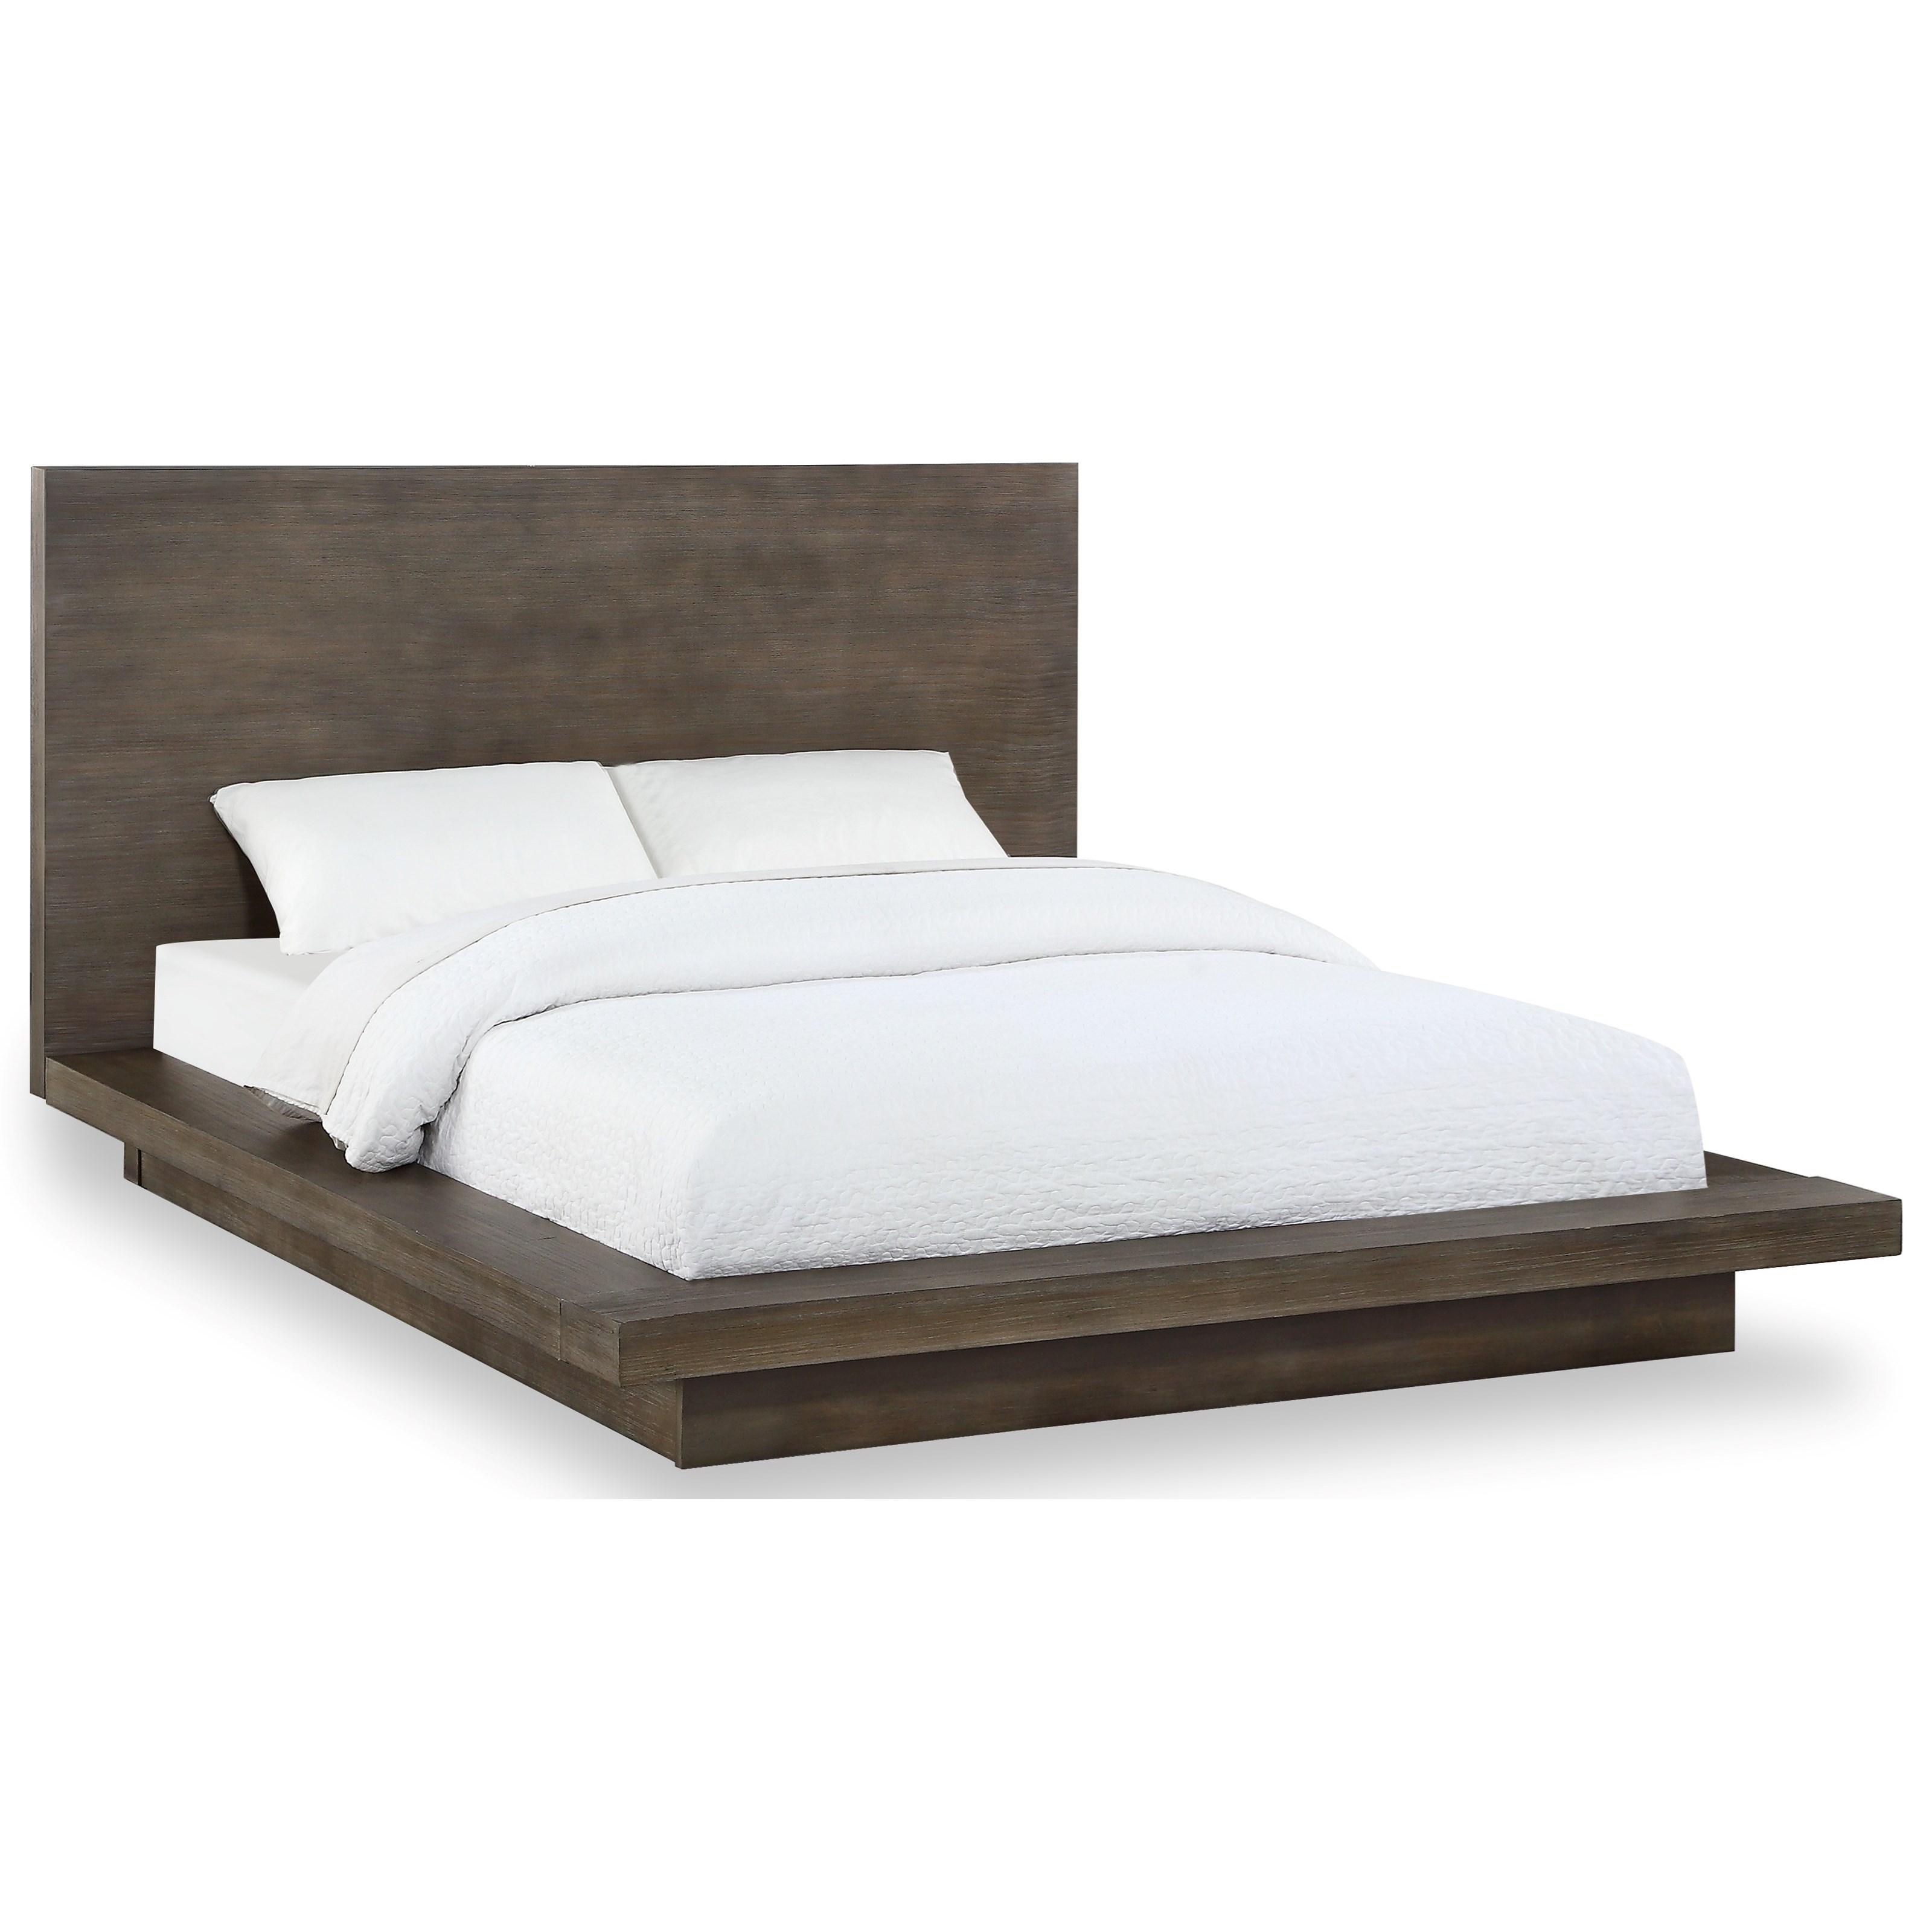 Contemporary, Rustic Platform Bed MELBOURNE 8D64H5 in Brown 